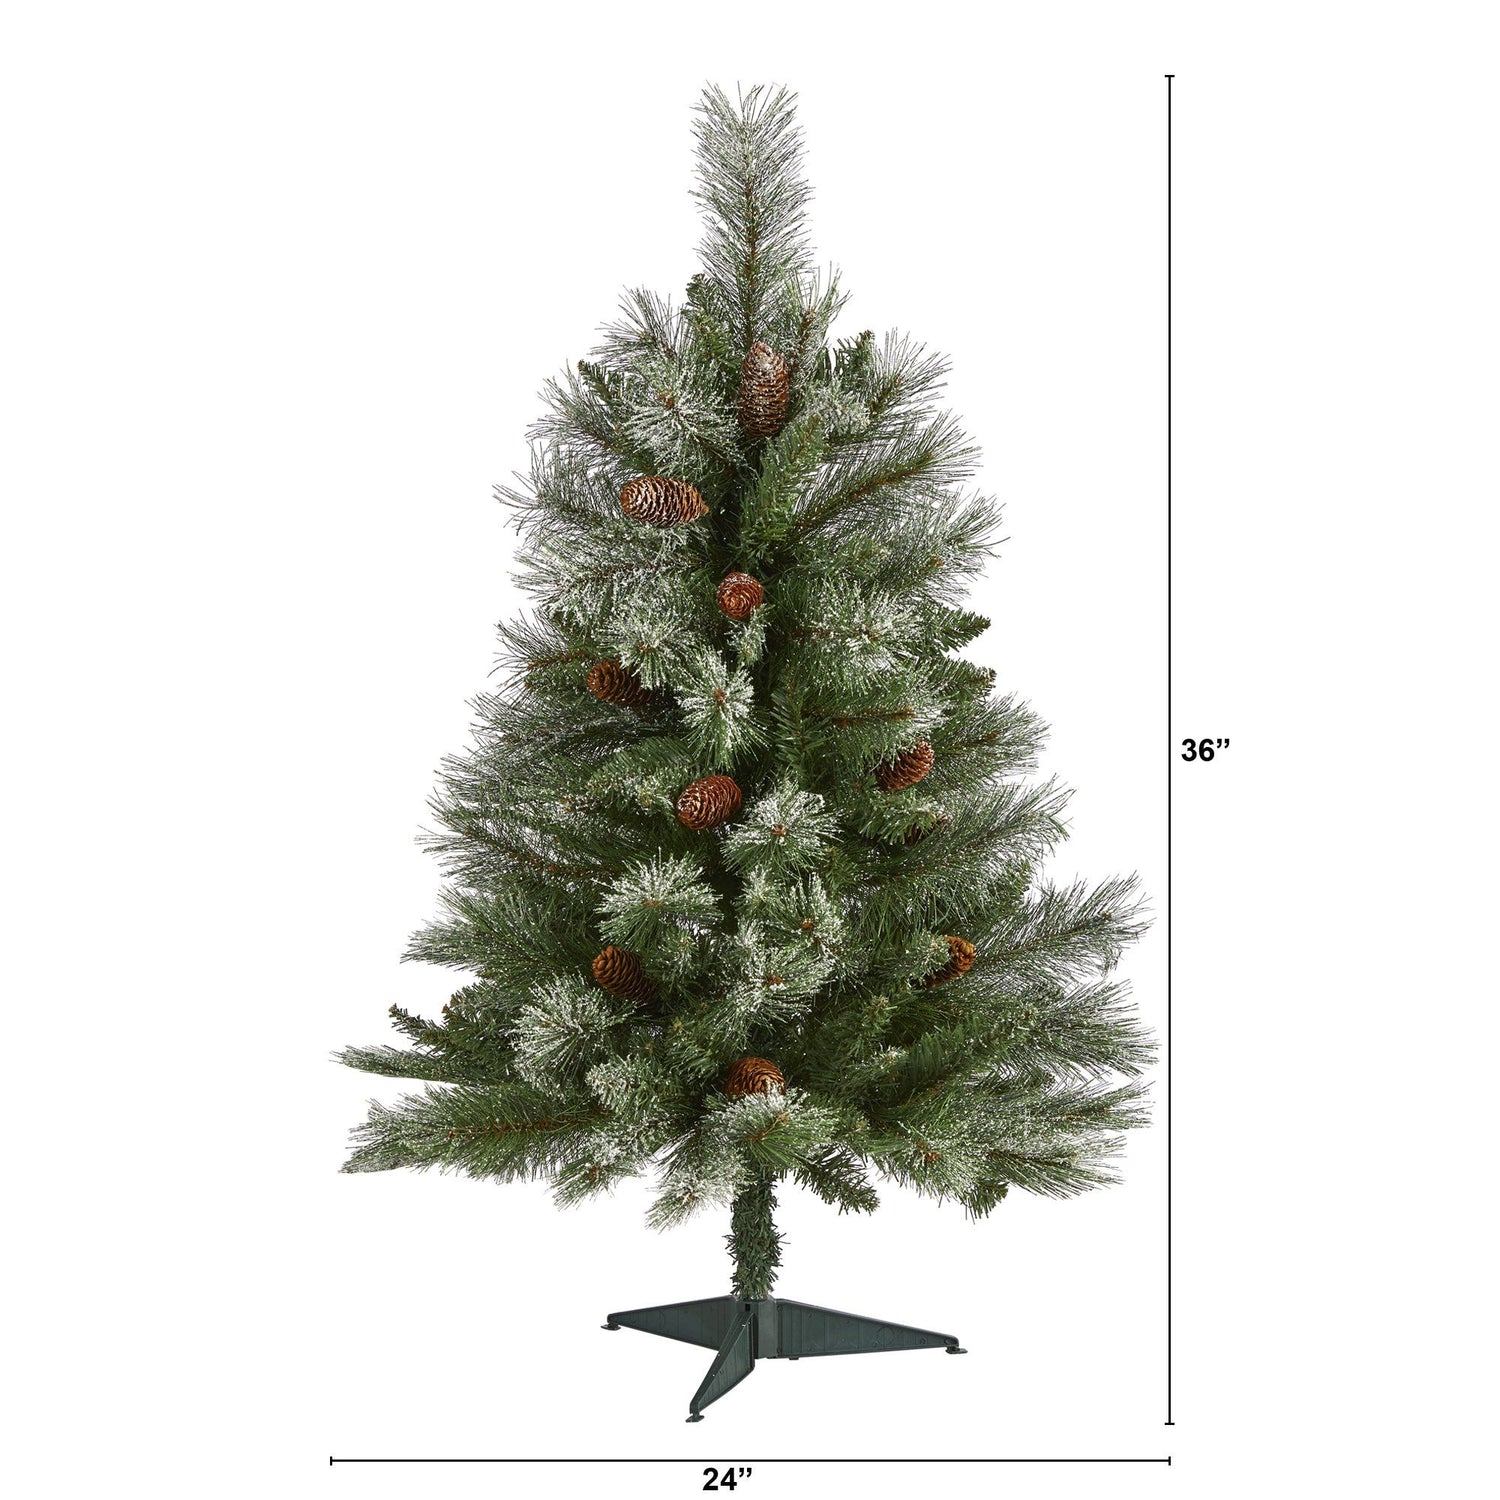 3’ Snowed French Alps Mountain Pine Artificial Christmas Tree with 135 Bendable Branches and Pine Cones